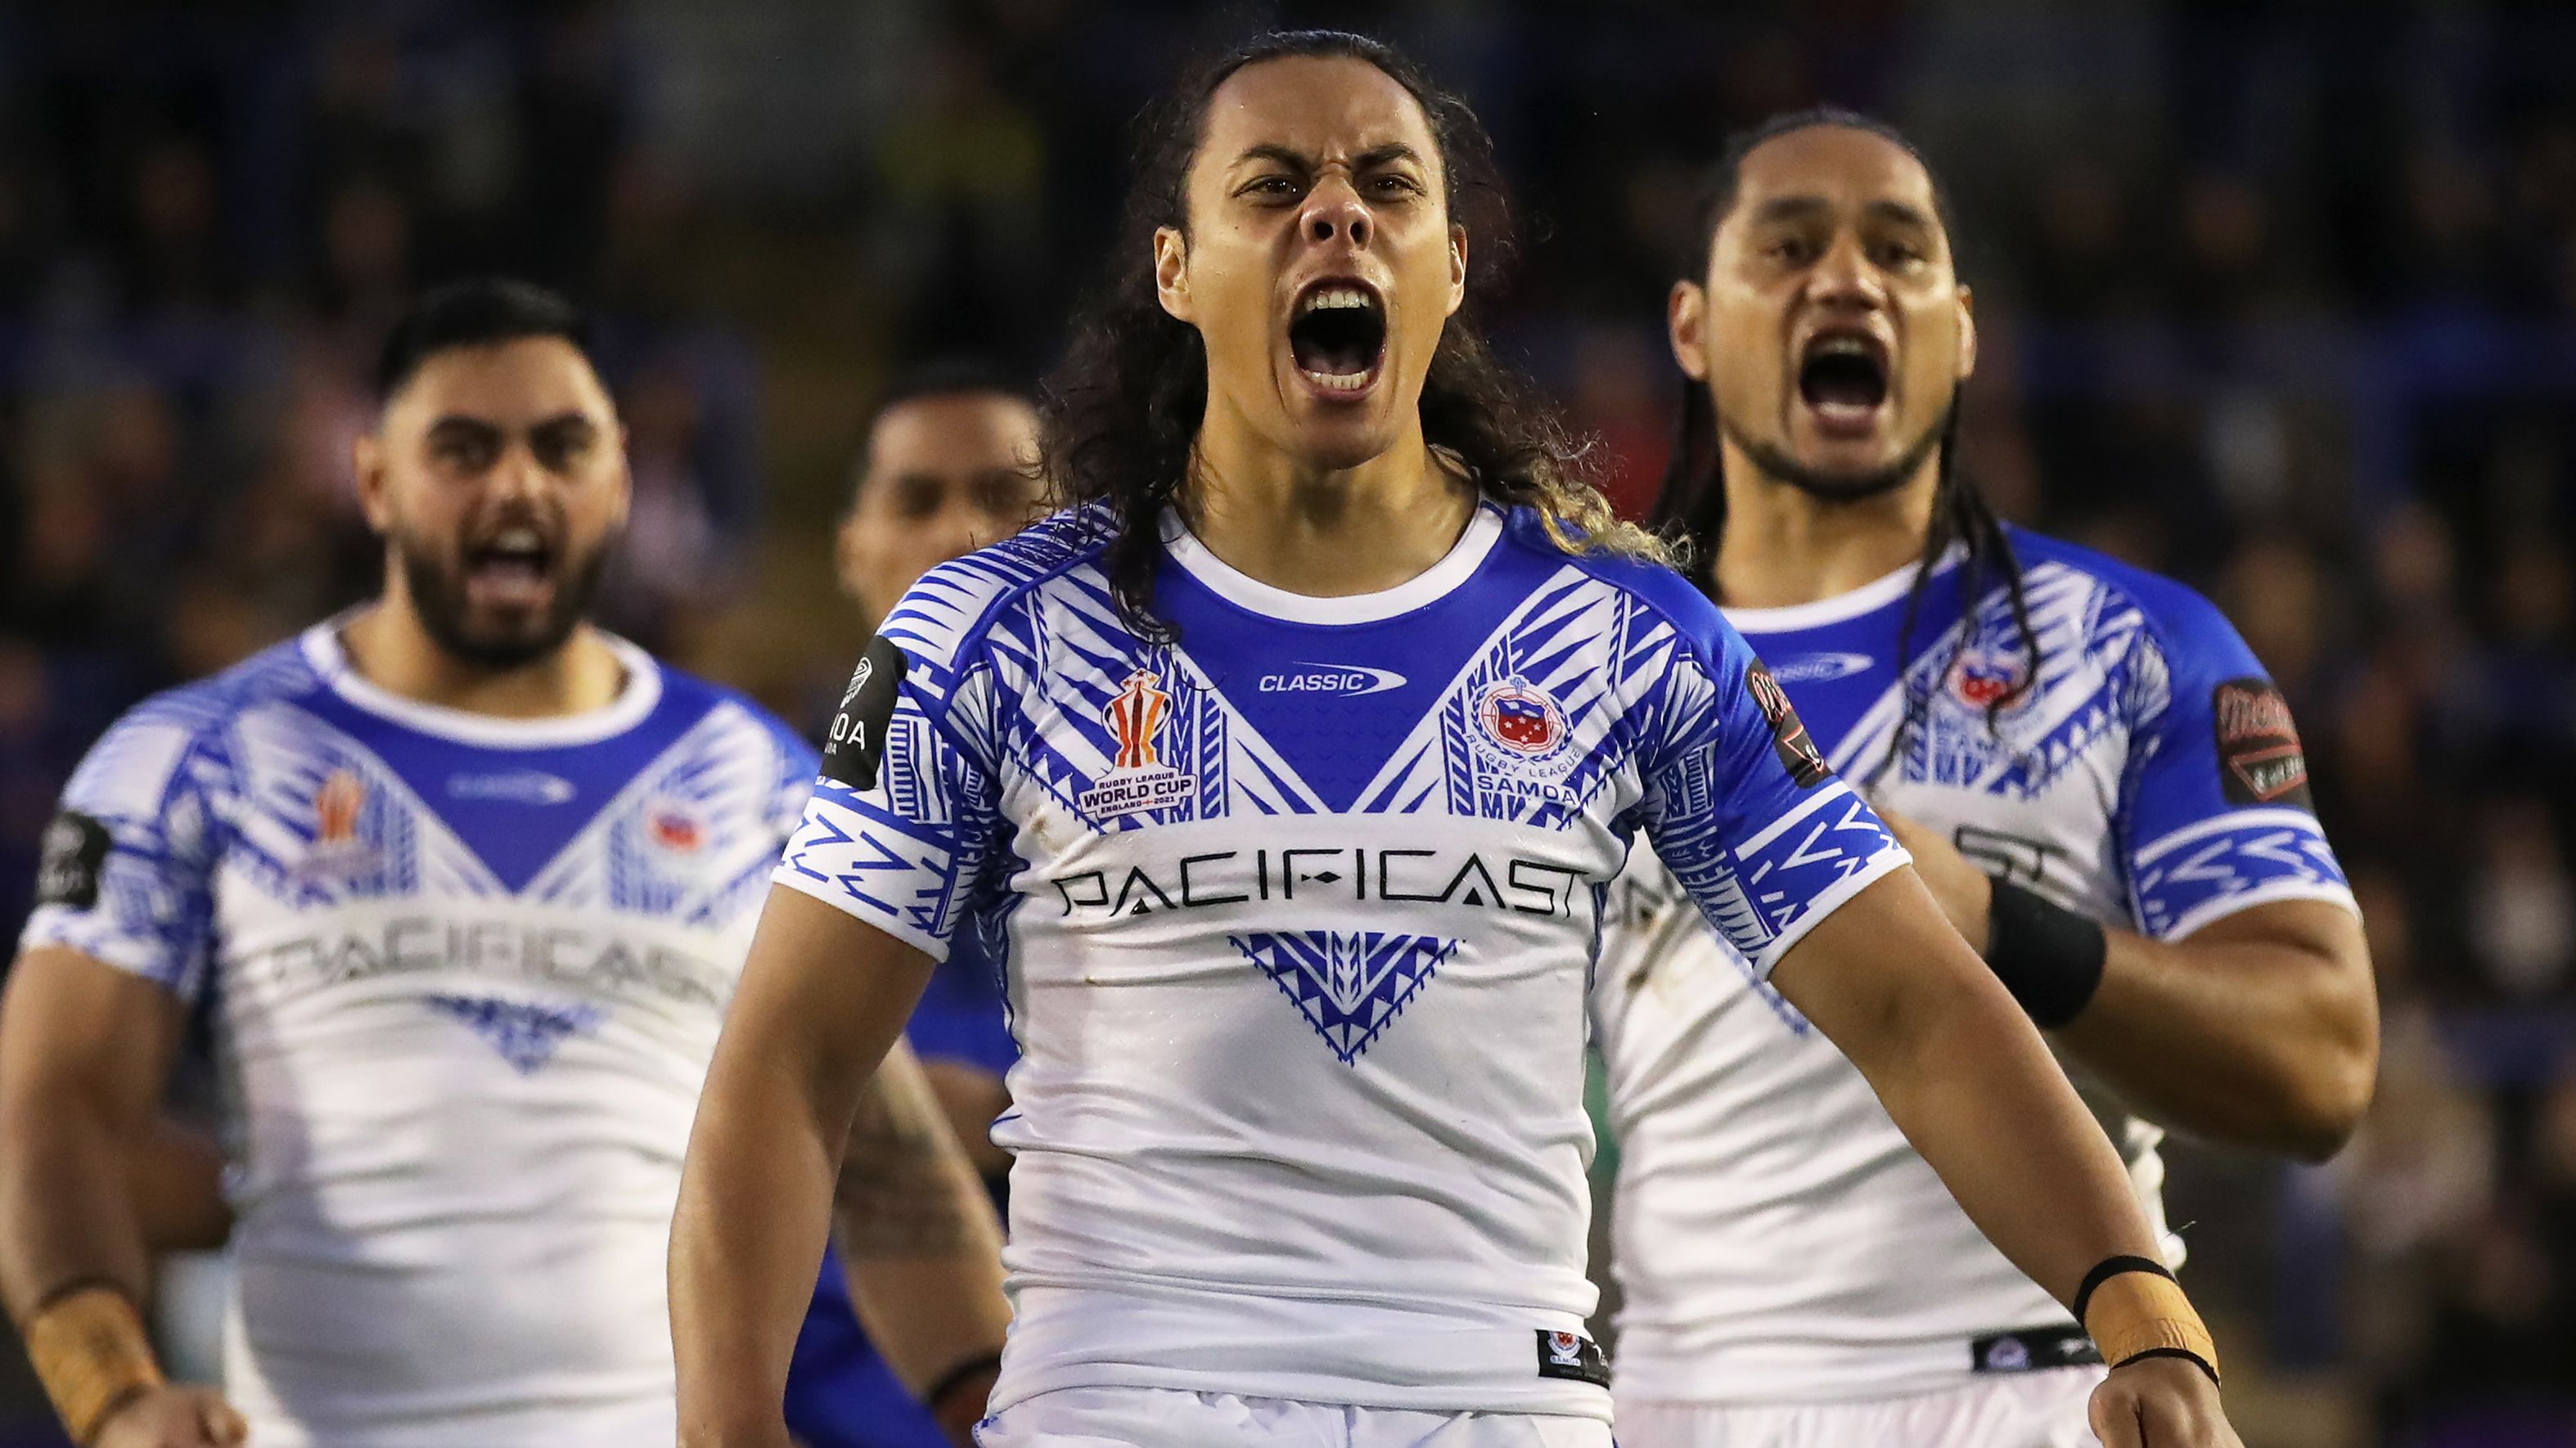 Rugby League World Cup state of play: Coach's crossroad as Samoa faces quarter-final clash with Tonga